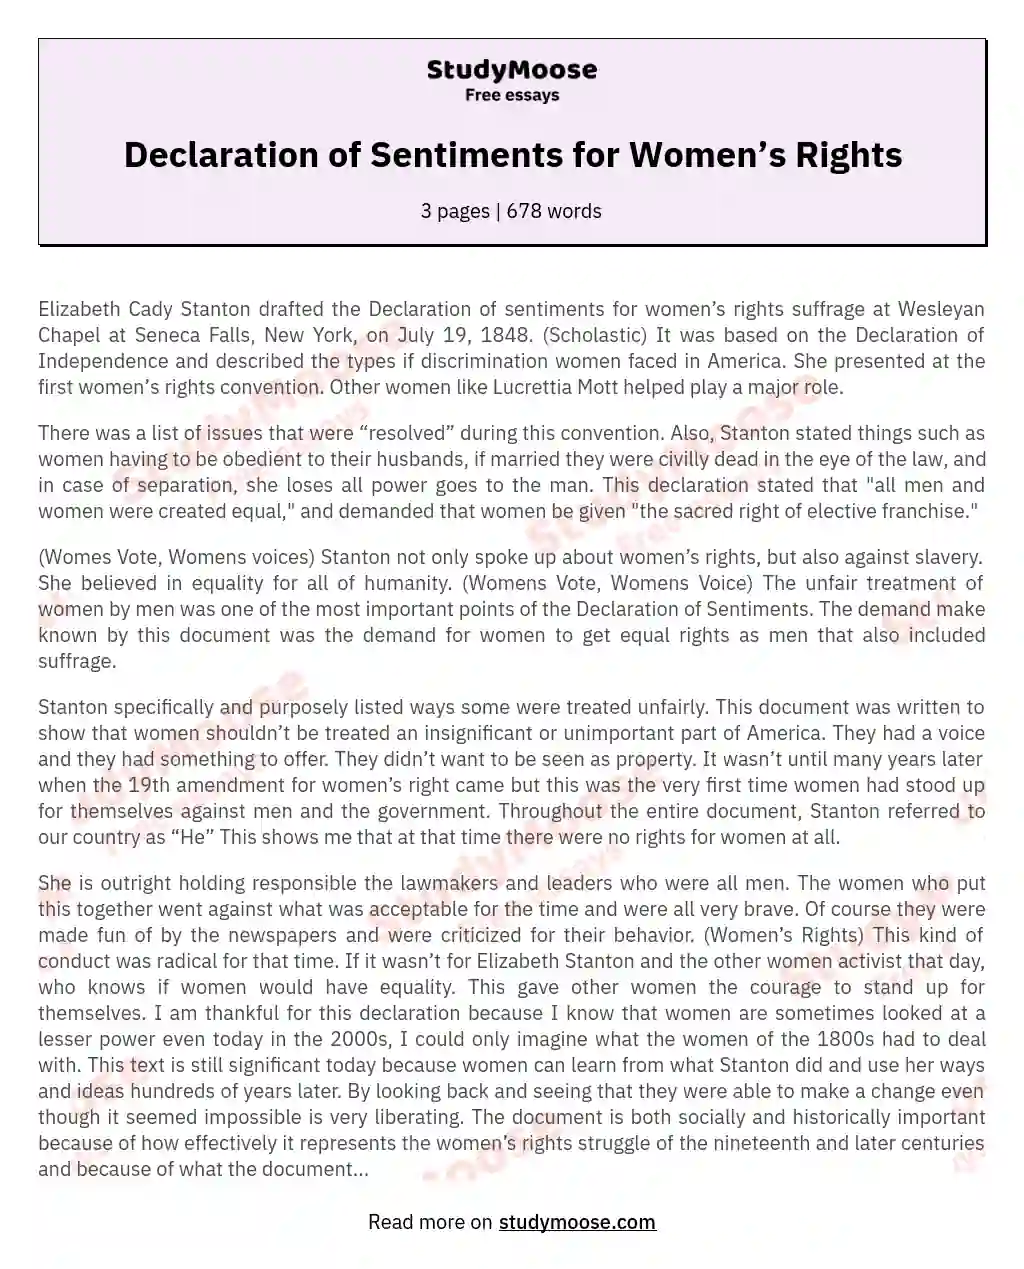 Declaration of Sentiments for Women’s Rights